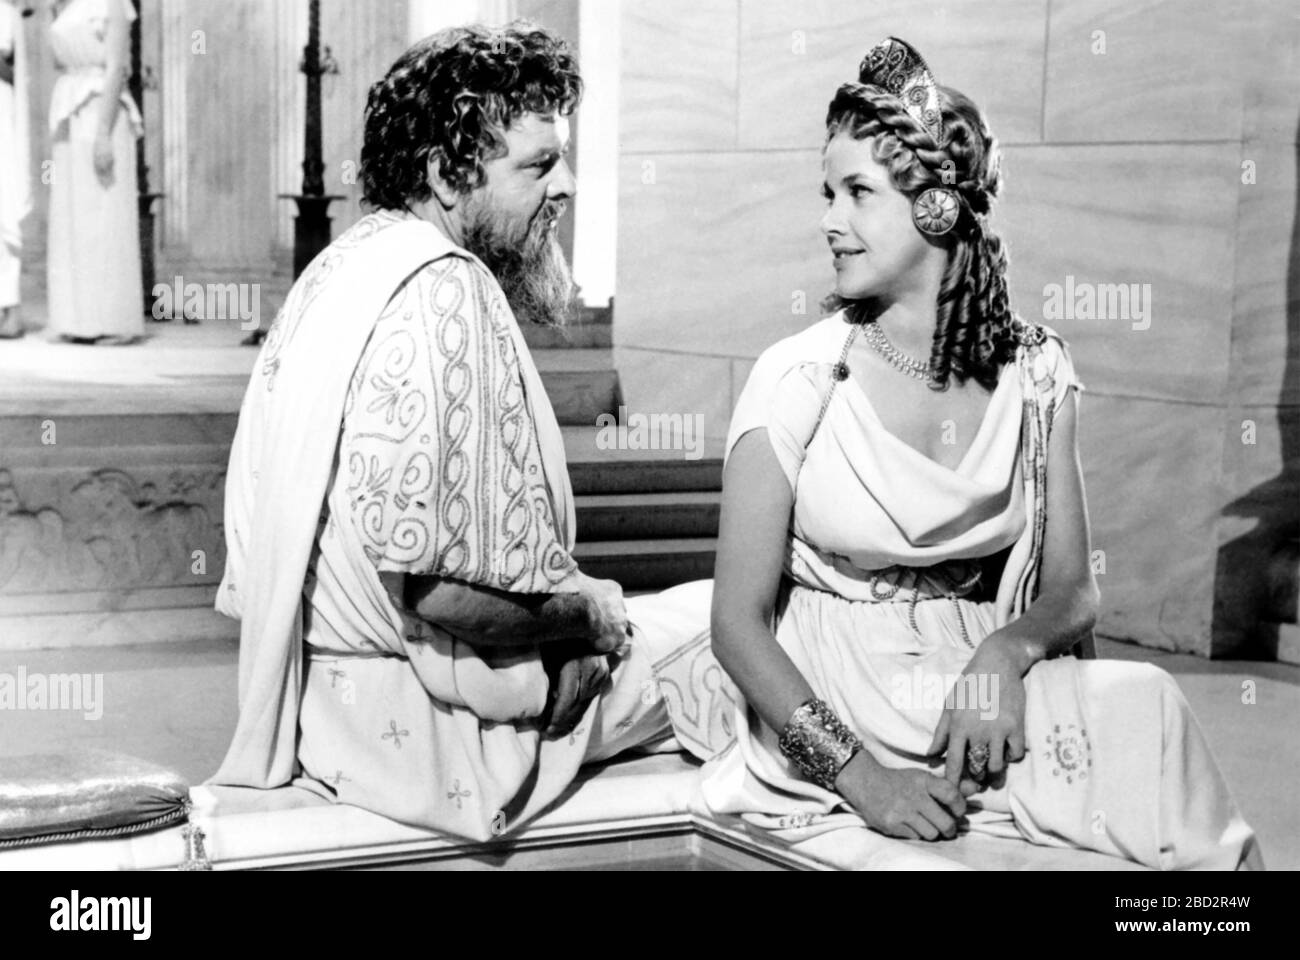 JASON AND THE ARGONAUTS 1963 Columbia Pictures film with Honor Blackman as Hera and Niall MacGinnis as Zeusa Stock Photo